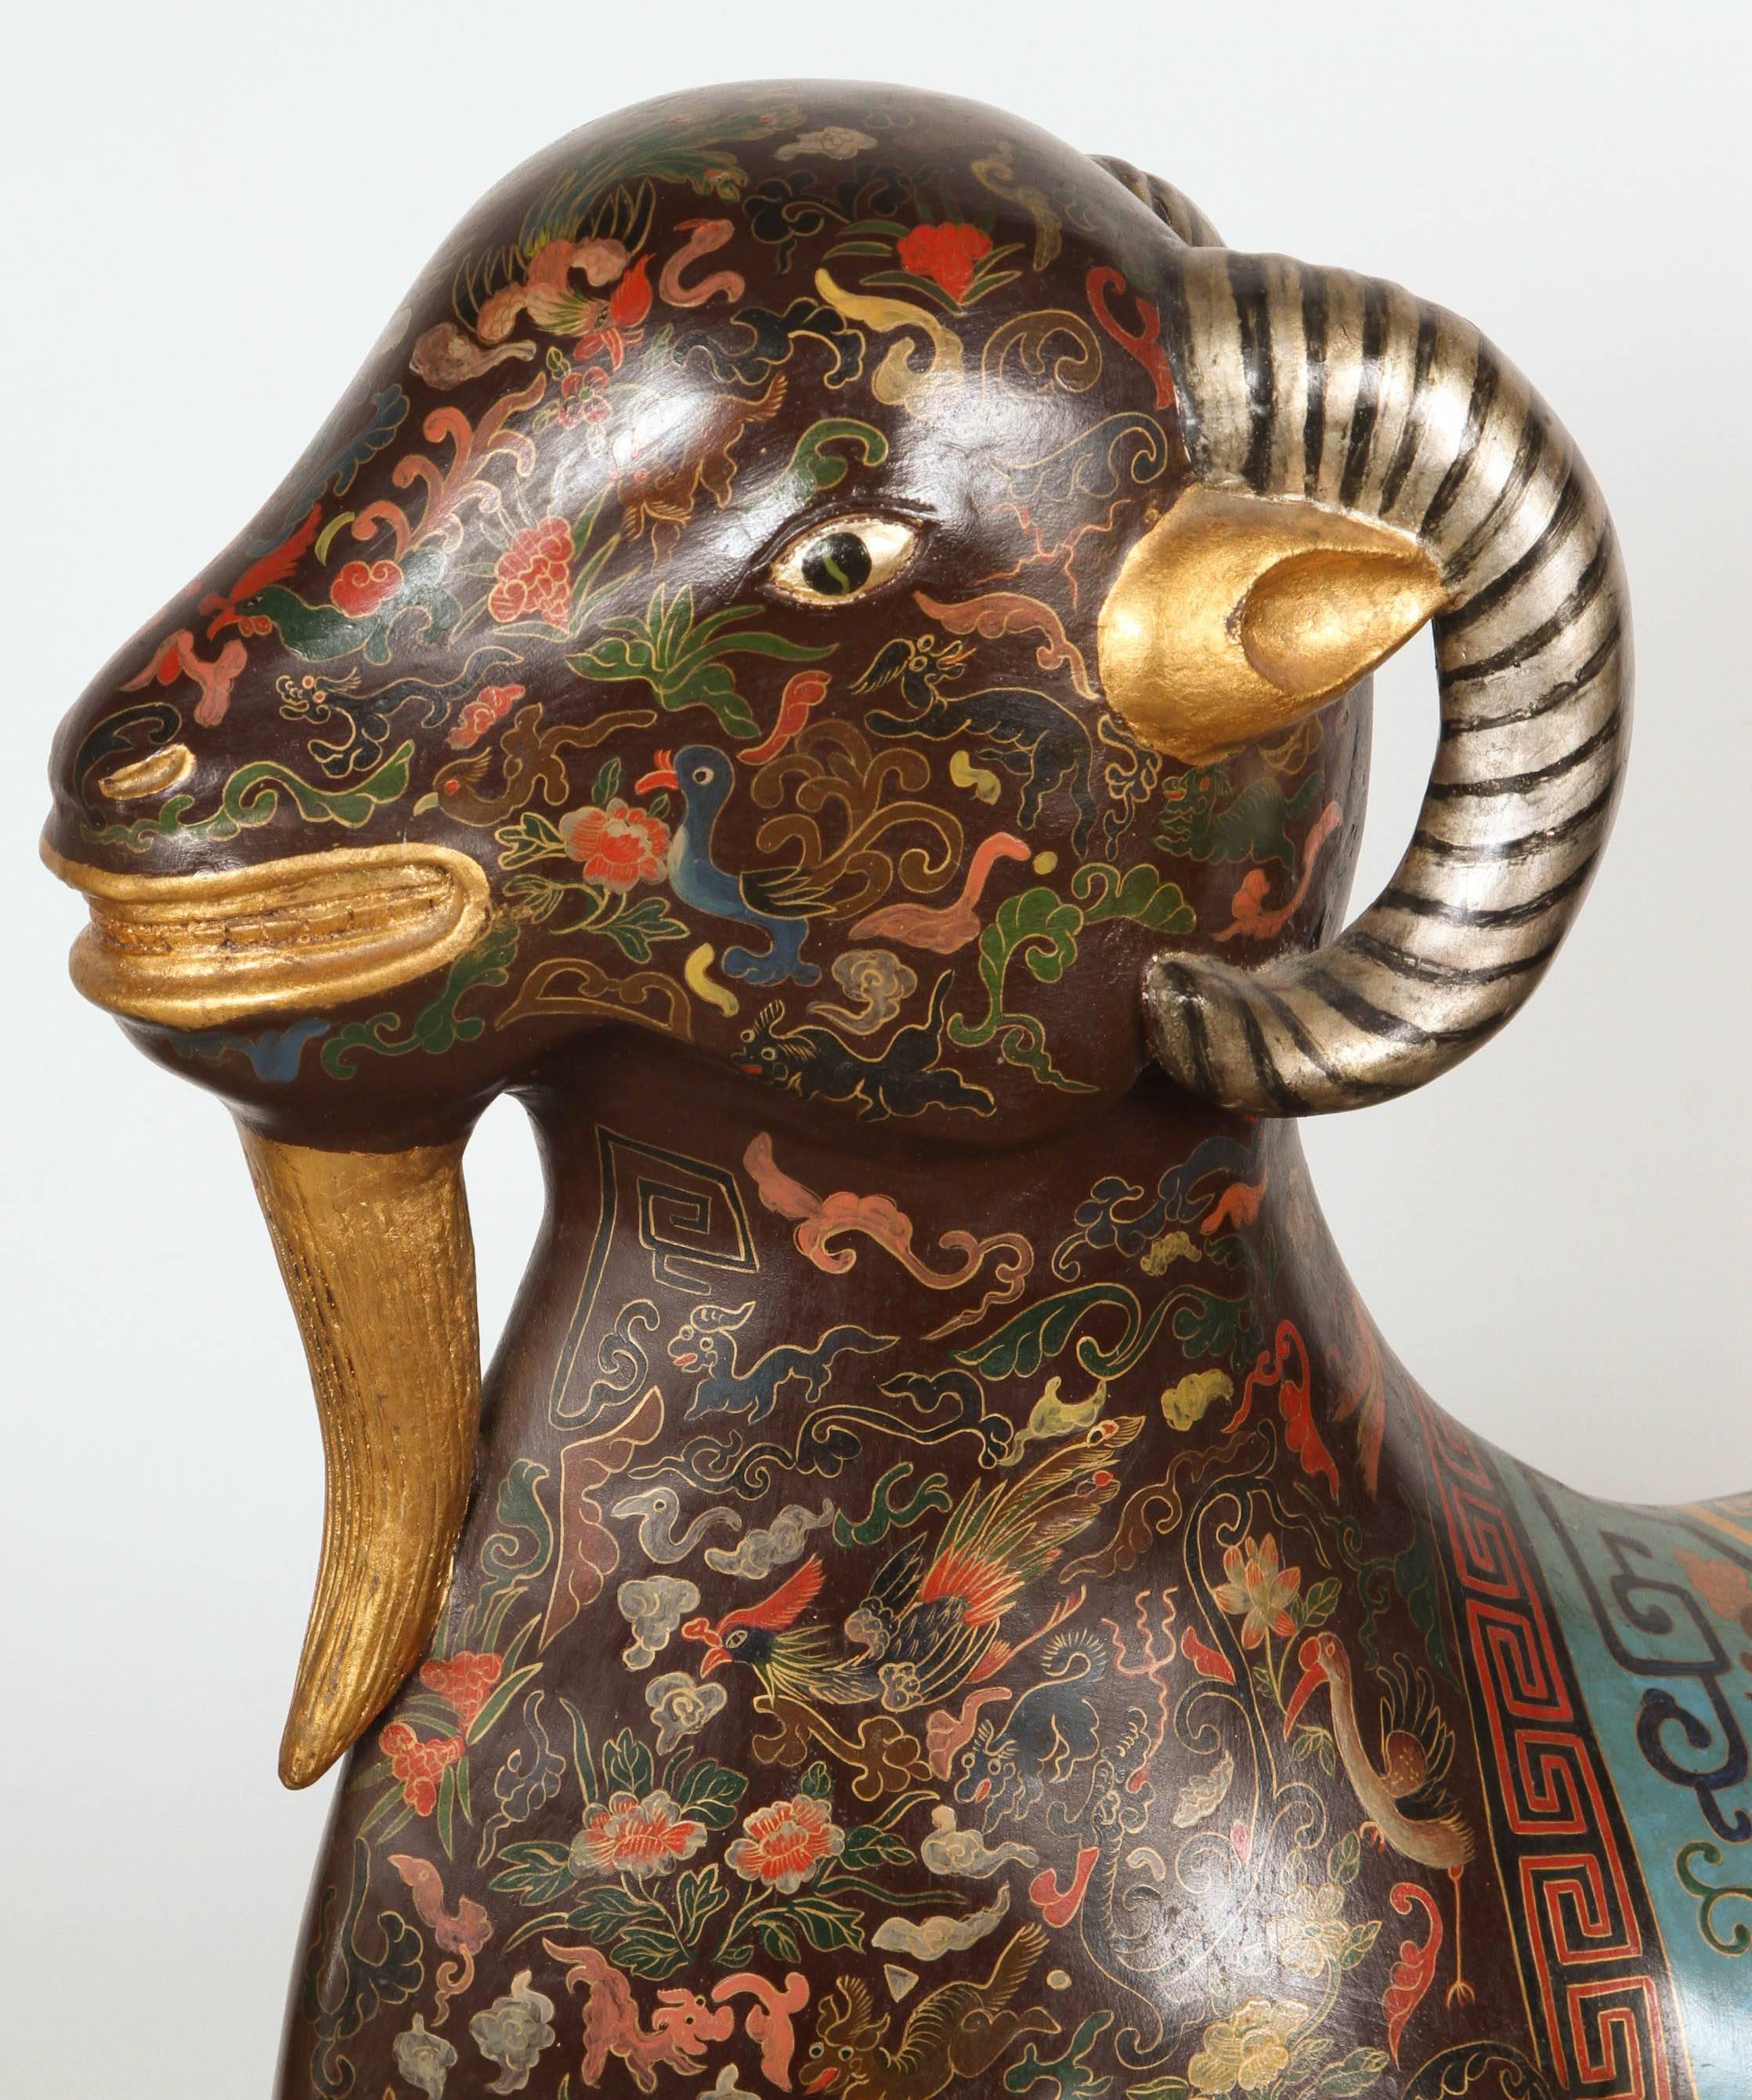 The Asian recumbent ram is shown resting upon gilded hooves with head raised and black eyes looking straight ahead, its mouth slightly opened, finely decorated with dense scrolled pattern in gold wire on brown background.
All the animals of the